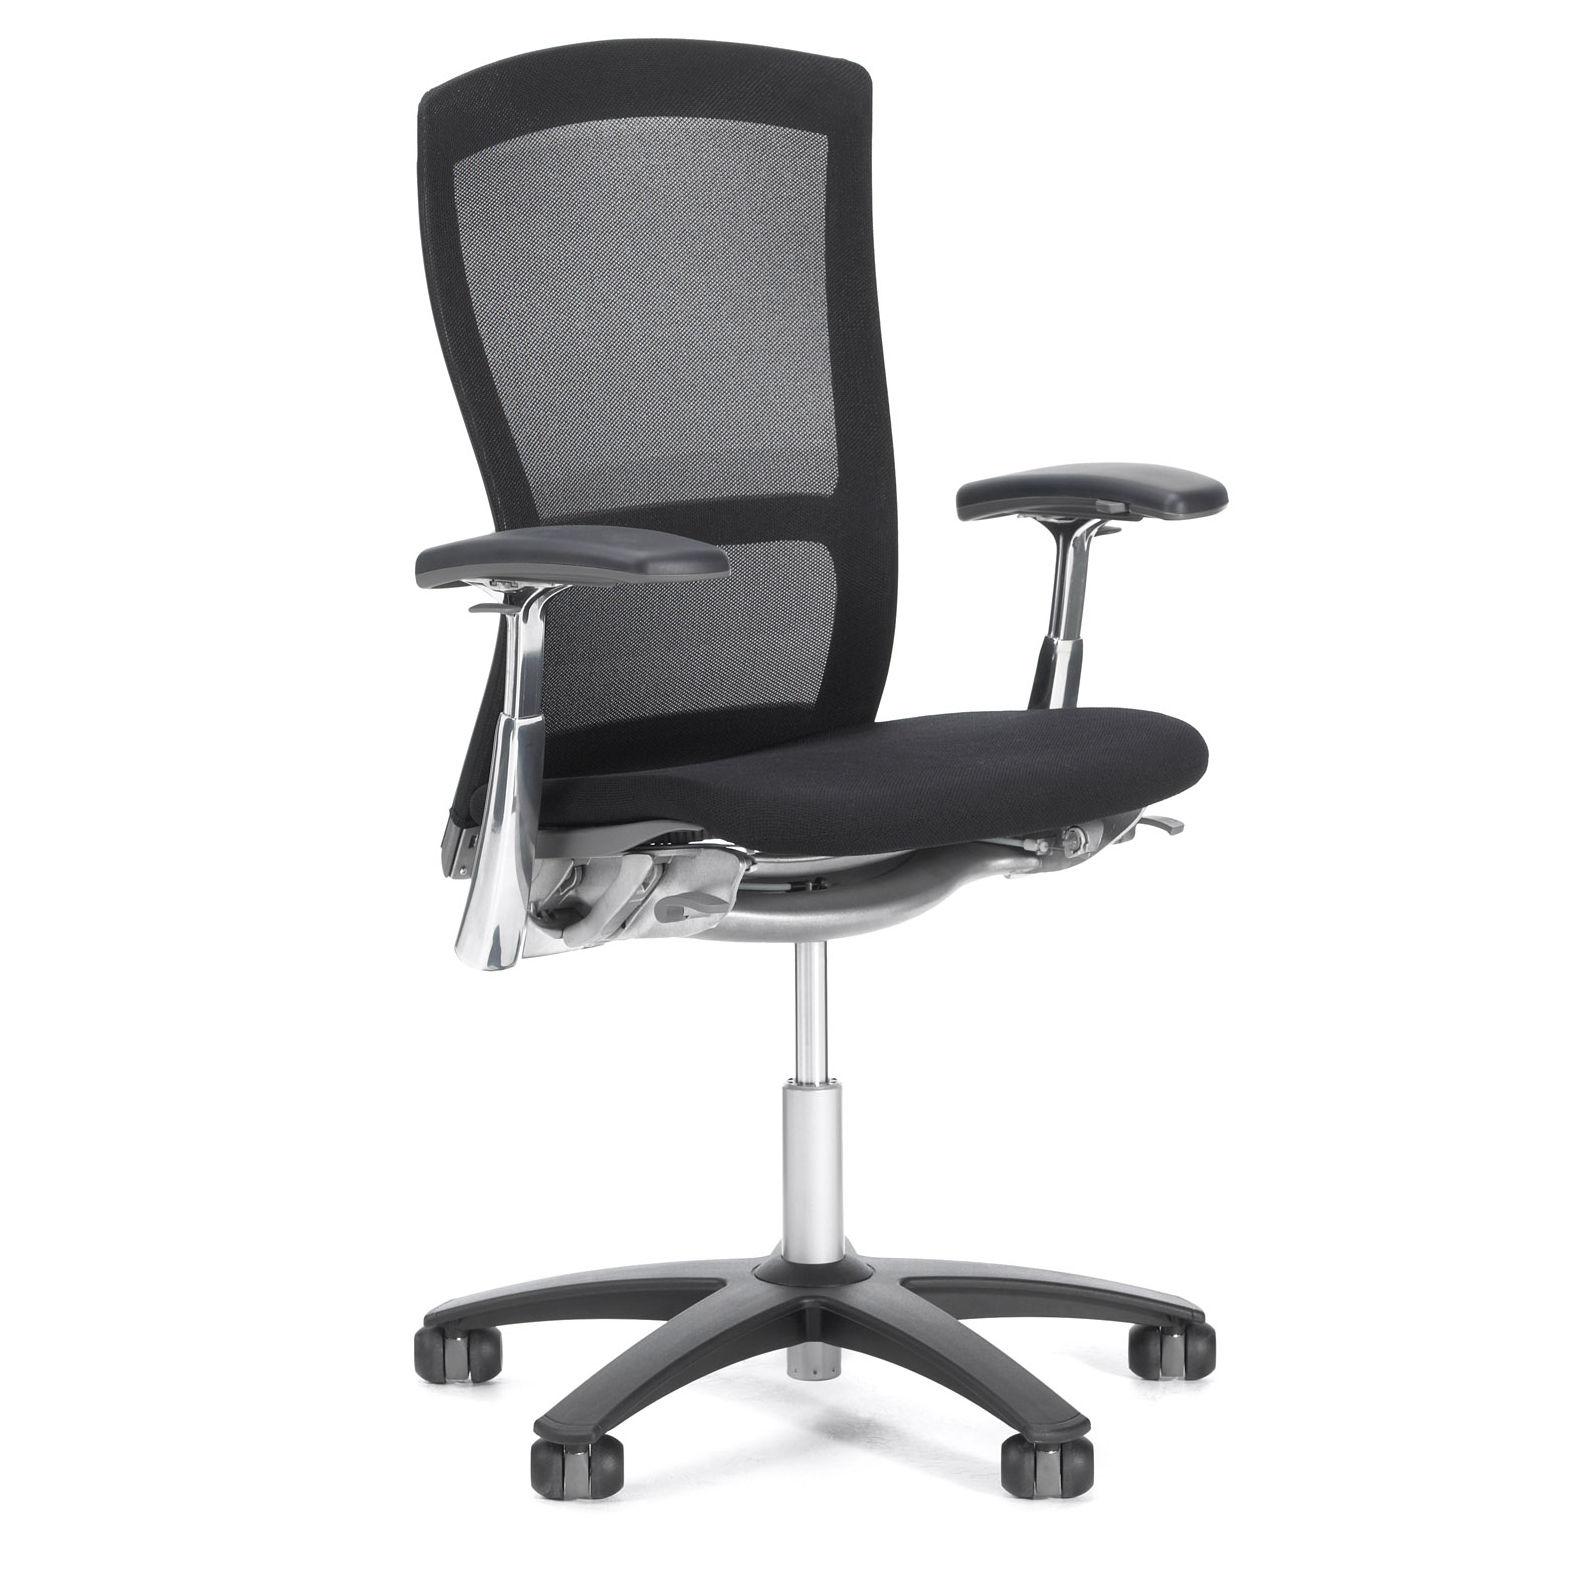 The Much-Coveted Aeron Chair Is The Gold Standard of Task Chairs-Made